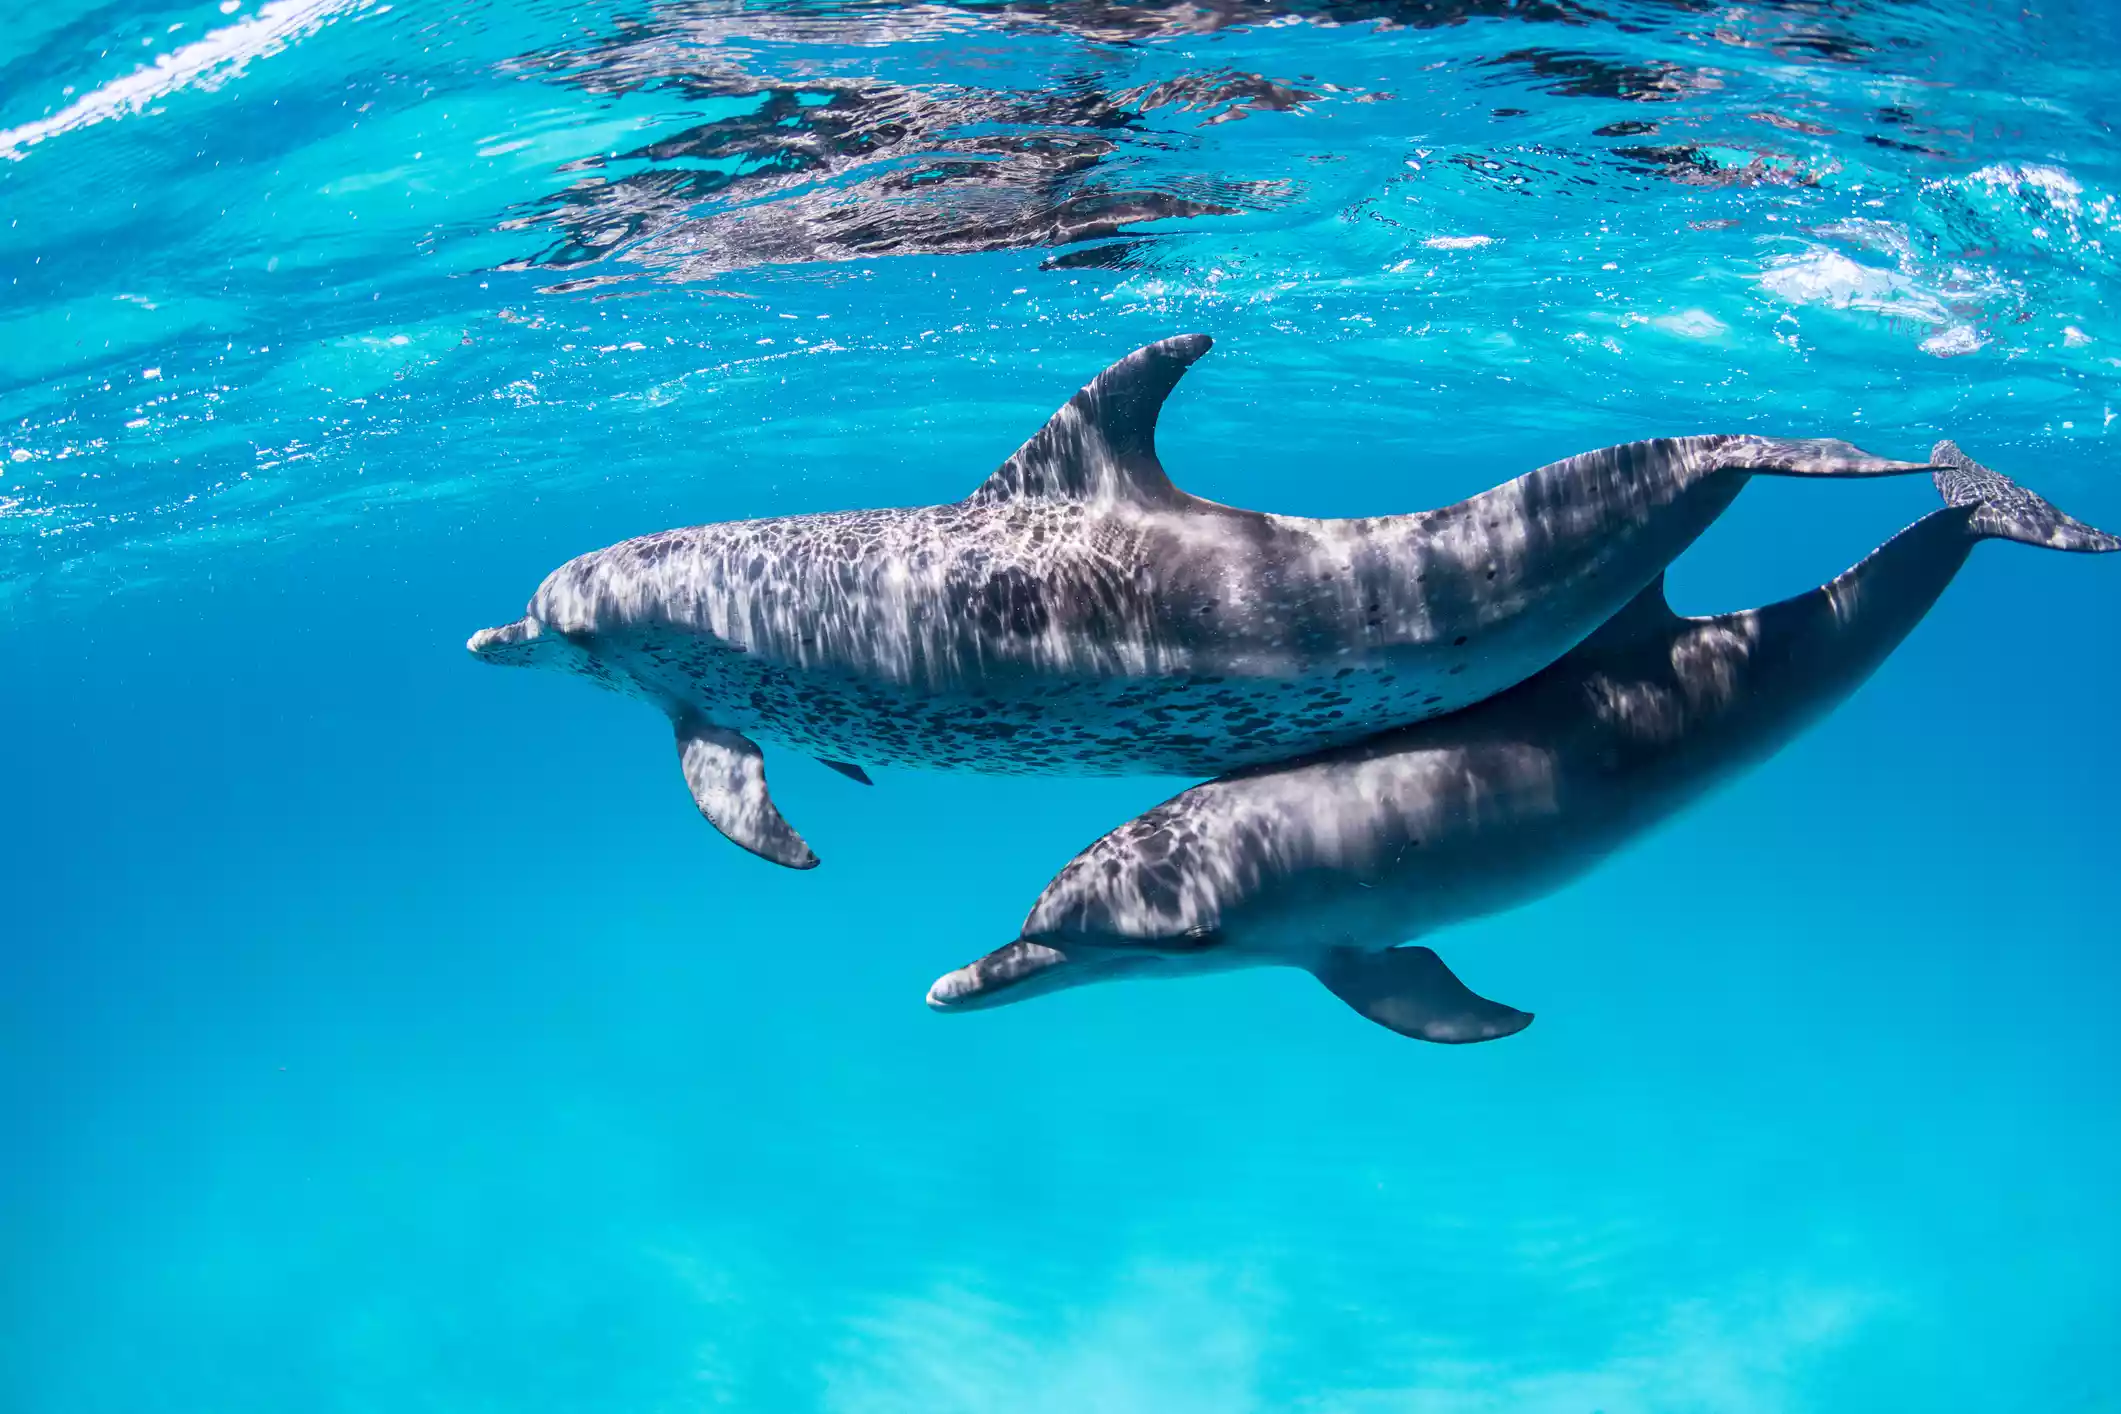 Atlantic Spotted Dolphins swimming in the ocean north of Bimini